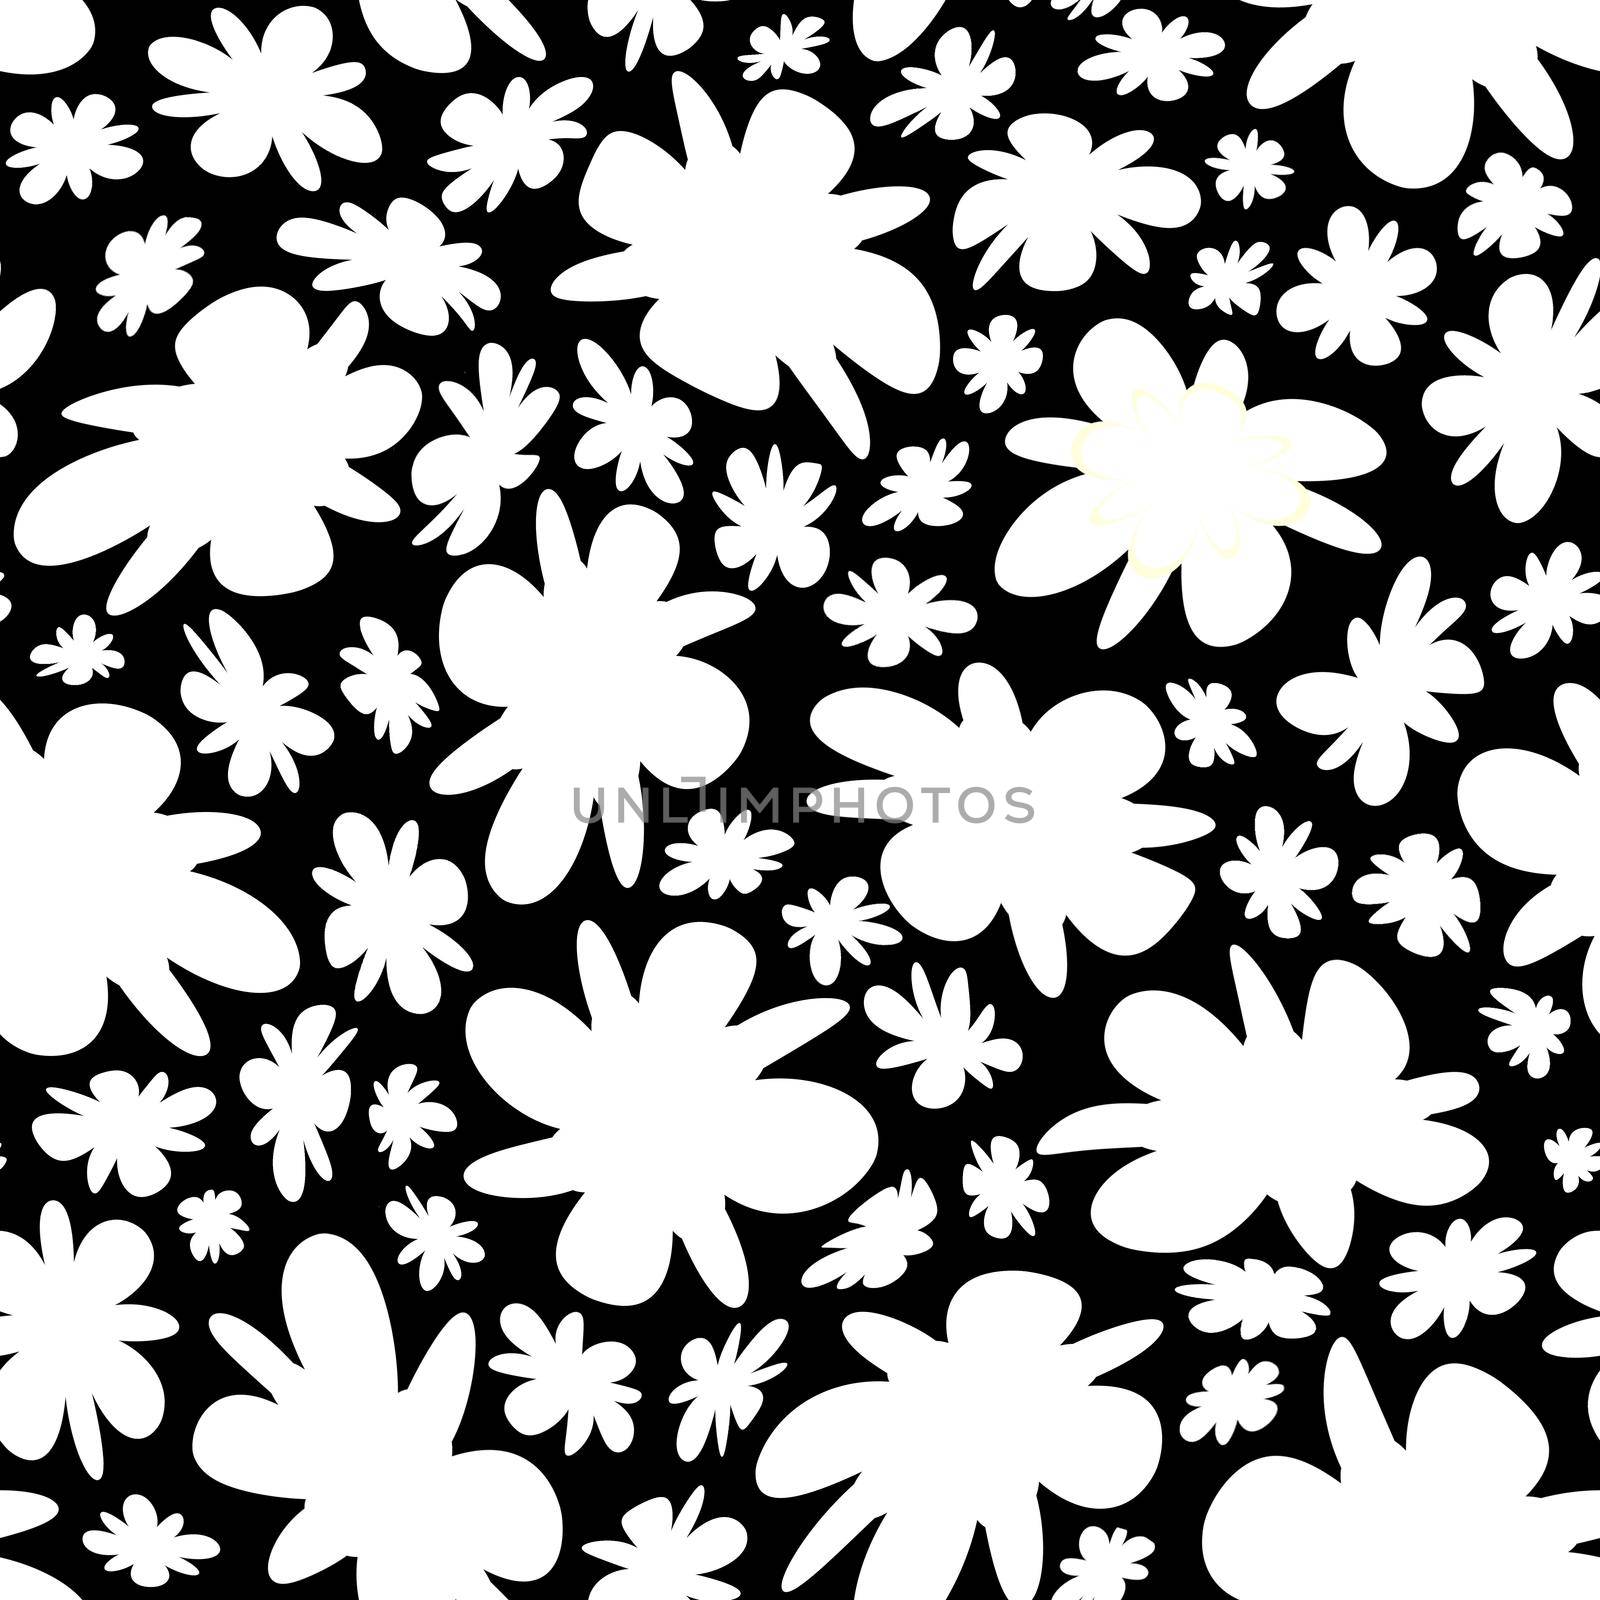 Trendy fabric pattern with miniature flowers.Summer print.Fashion design.Motifs scattered random.Elegant template for fashion prints.White on blackGood for fashion,textile,fabric,gift wrapping paper